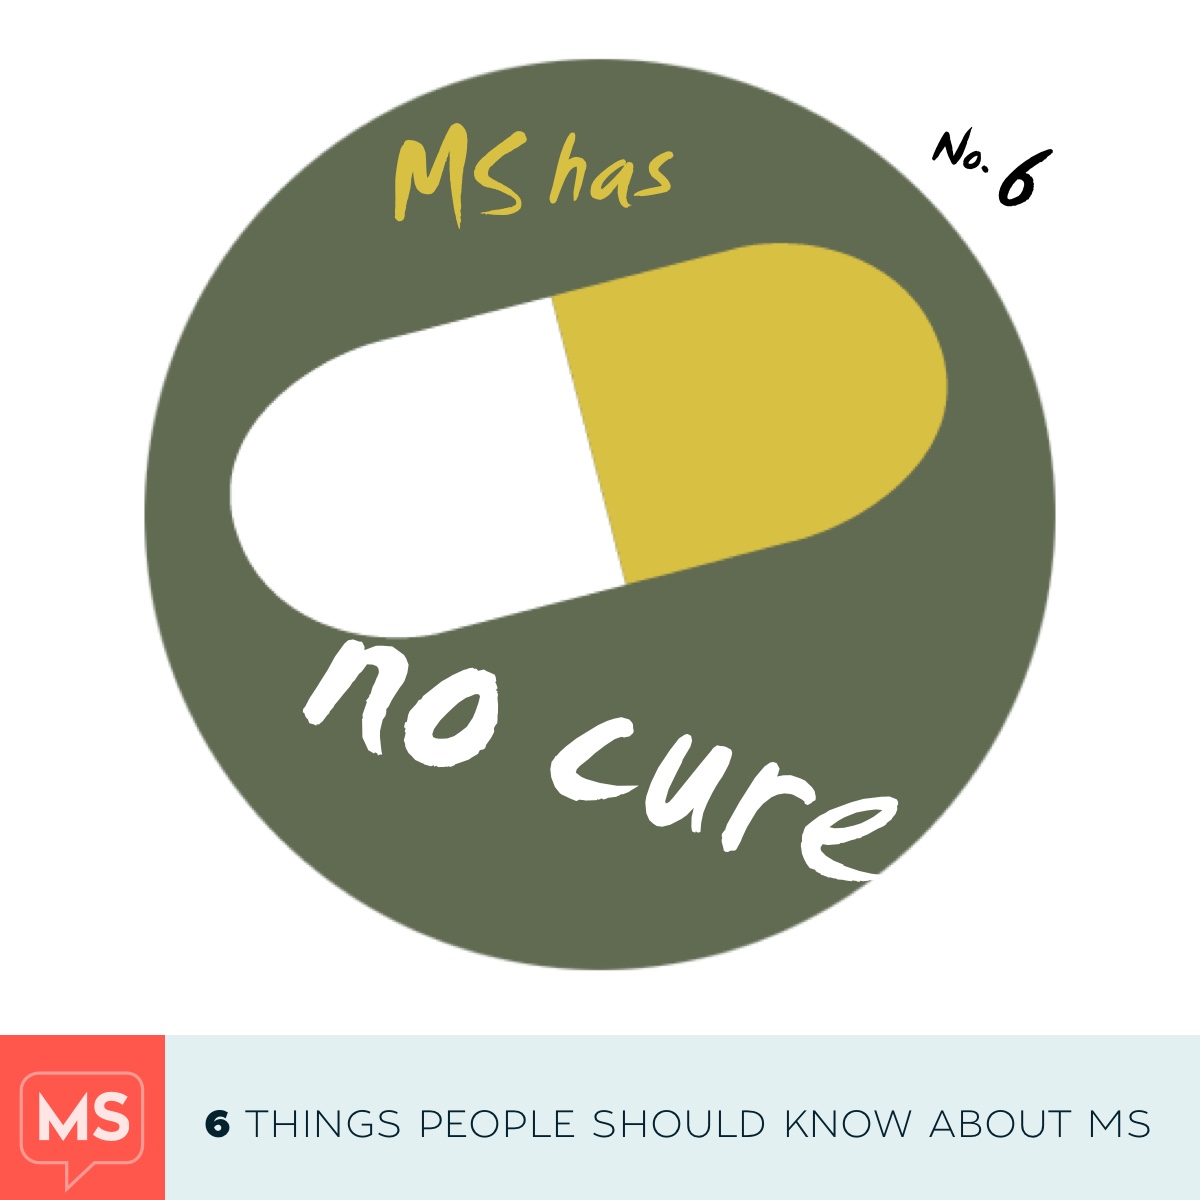 Six things people should know about MS